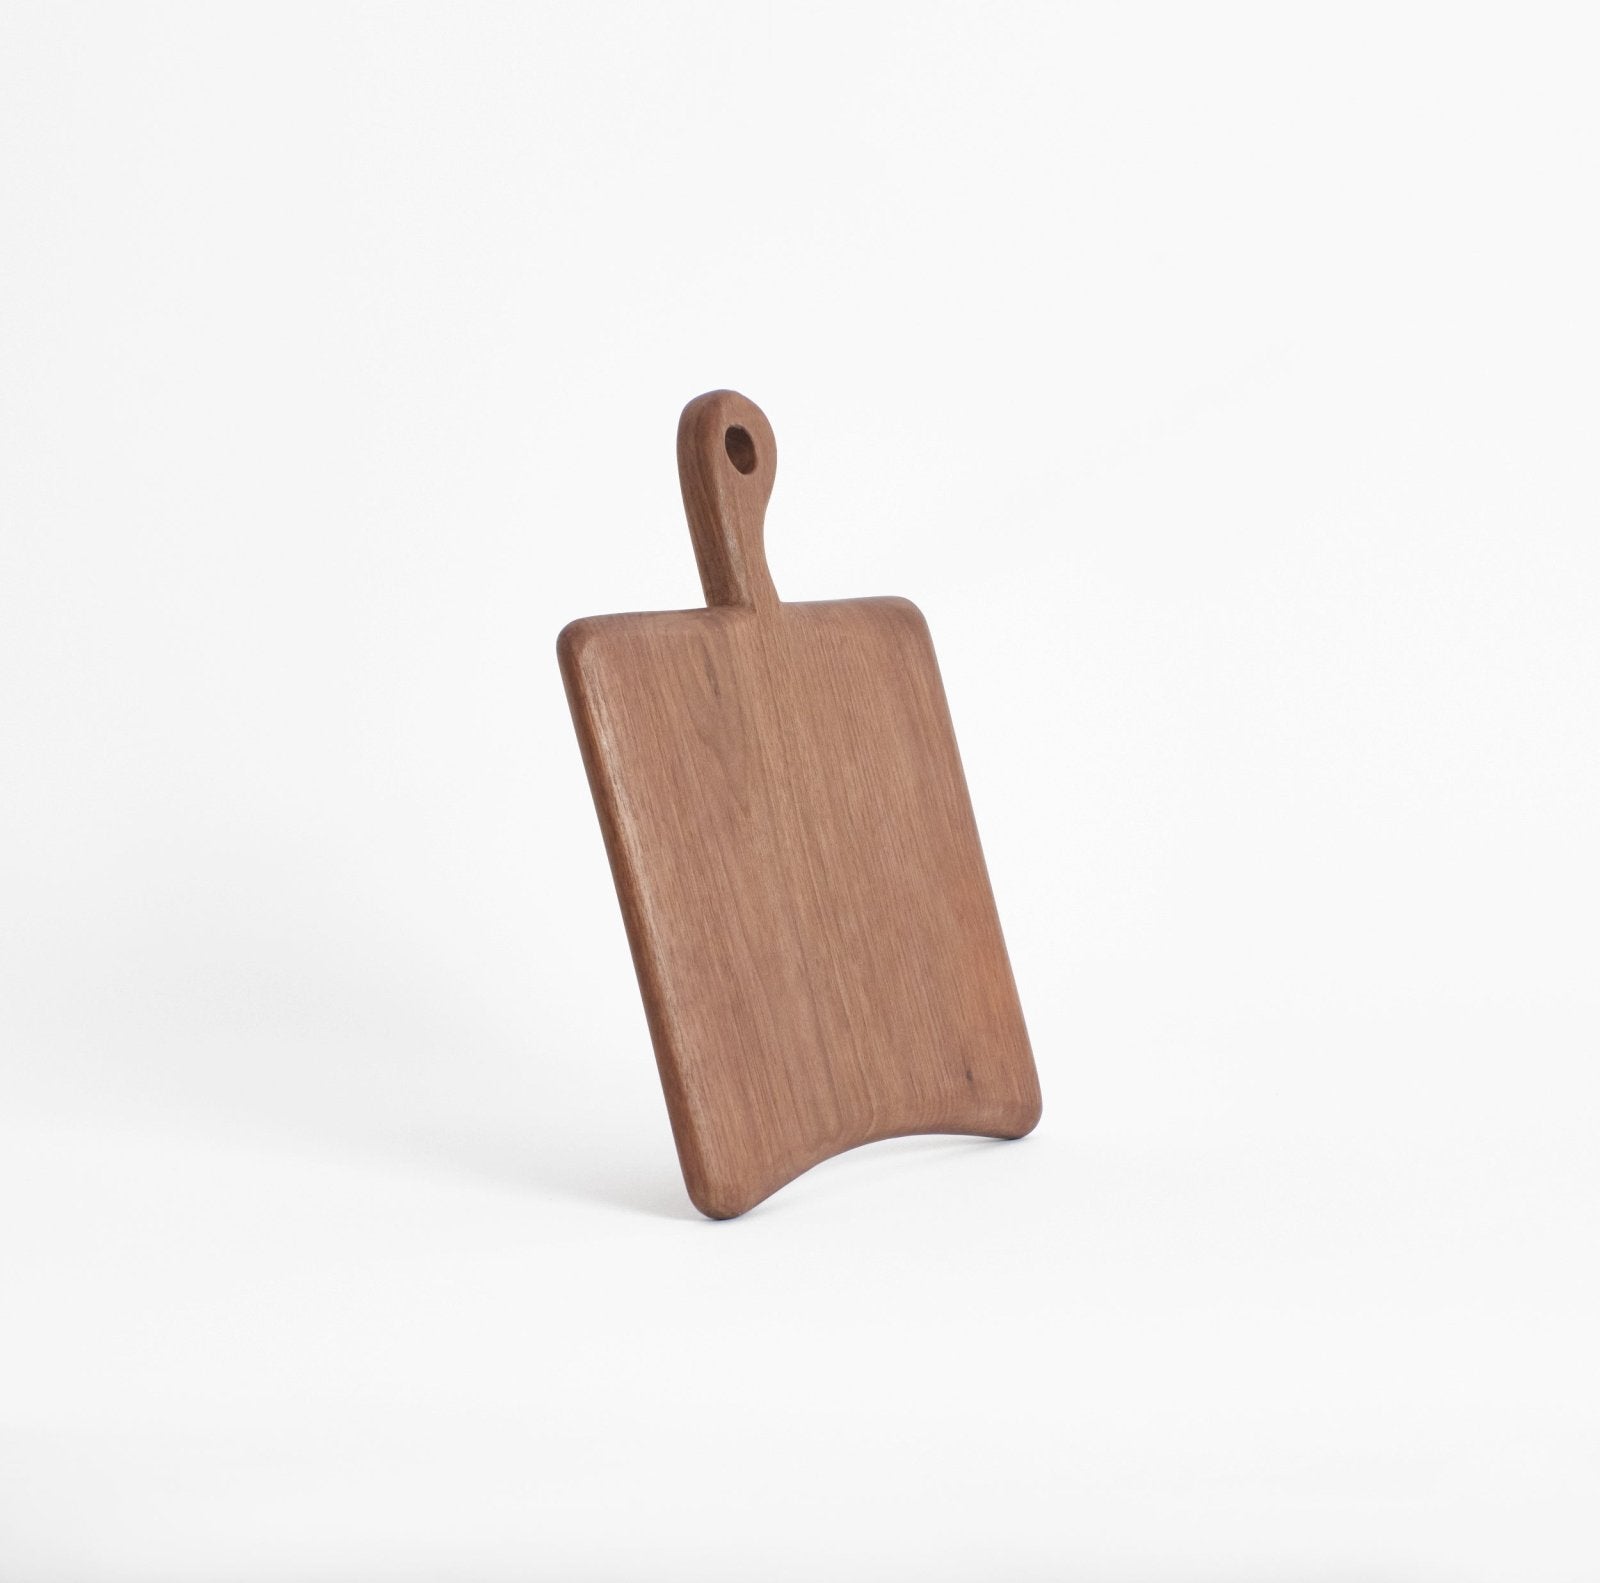 Square Wooden Board - Walnut Cutting Board Accessories by Project 213A